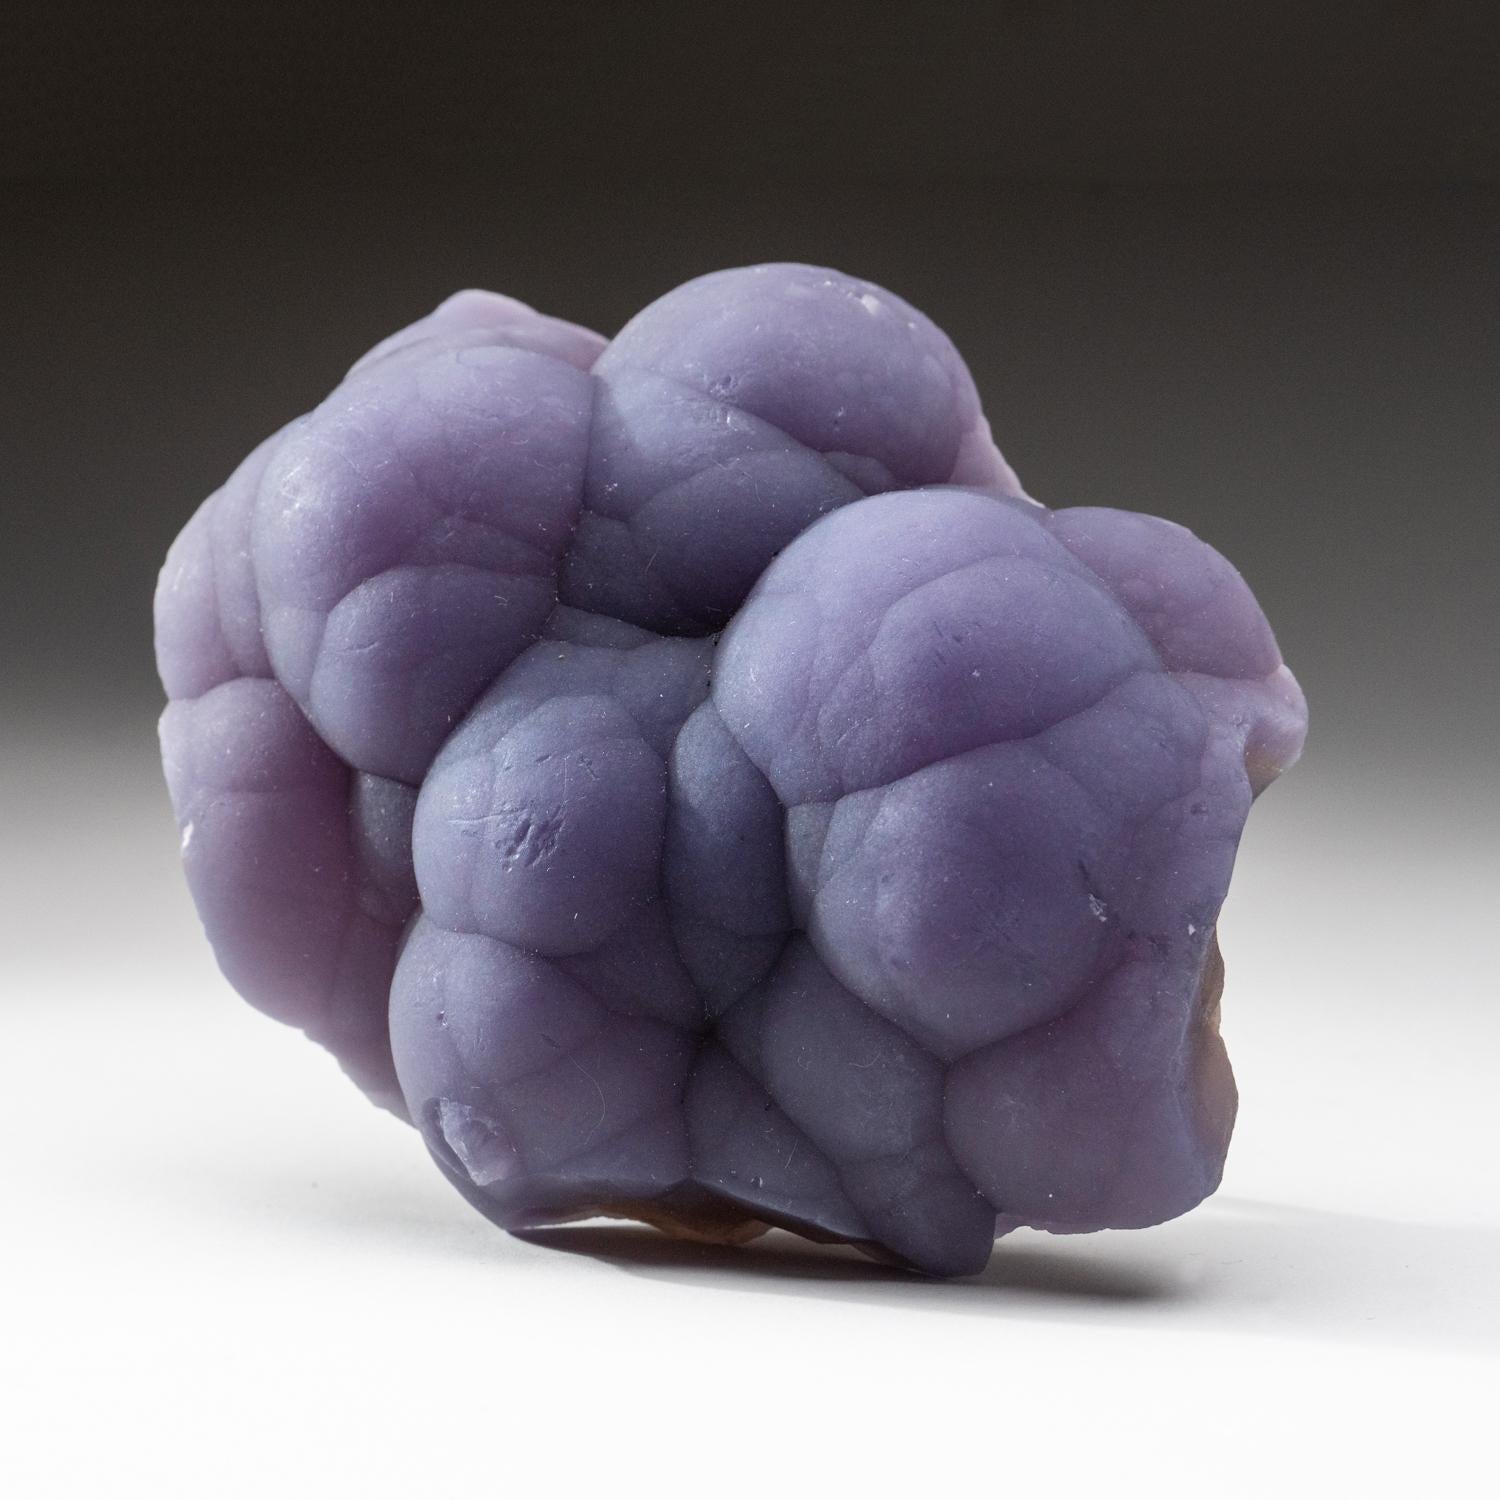 From Minggang Mine, Xinyang Prefecture, Henan, China Translucent purple fluorite in botryoidal formation with sculptural hemispherical aggregates covering both sides of its matrix. This unique specimen is sure to be a standout addition to any